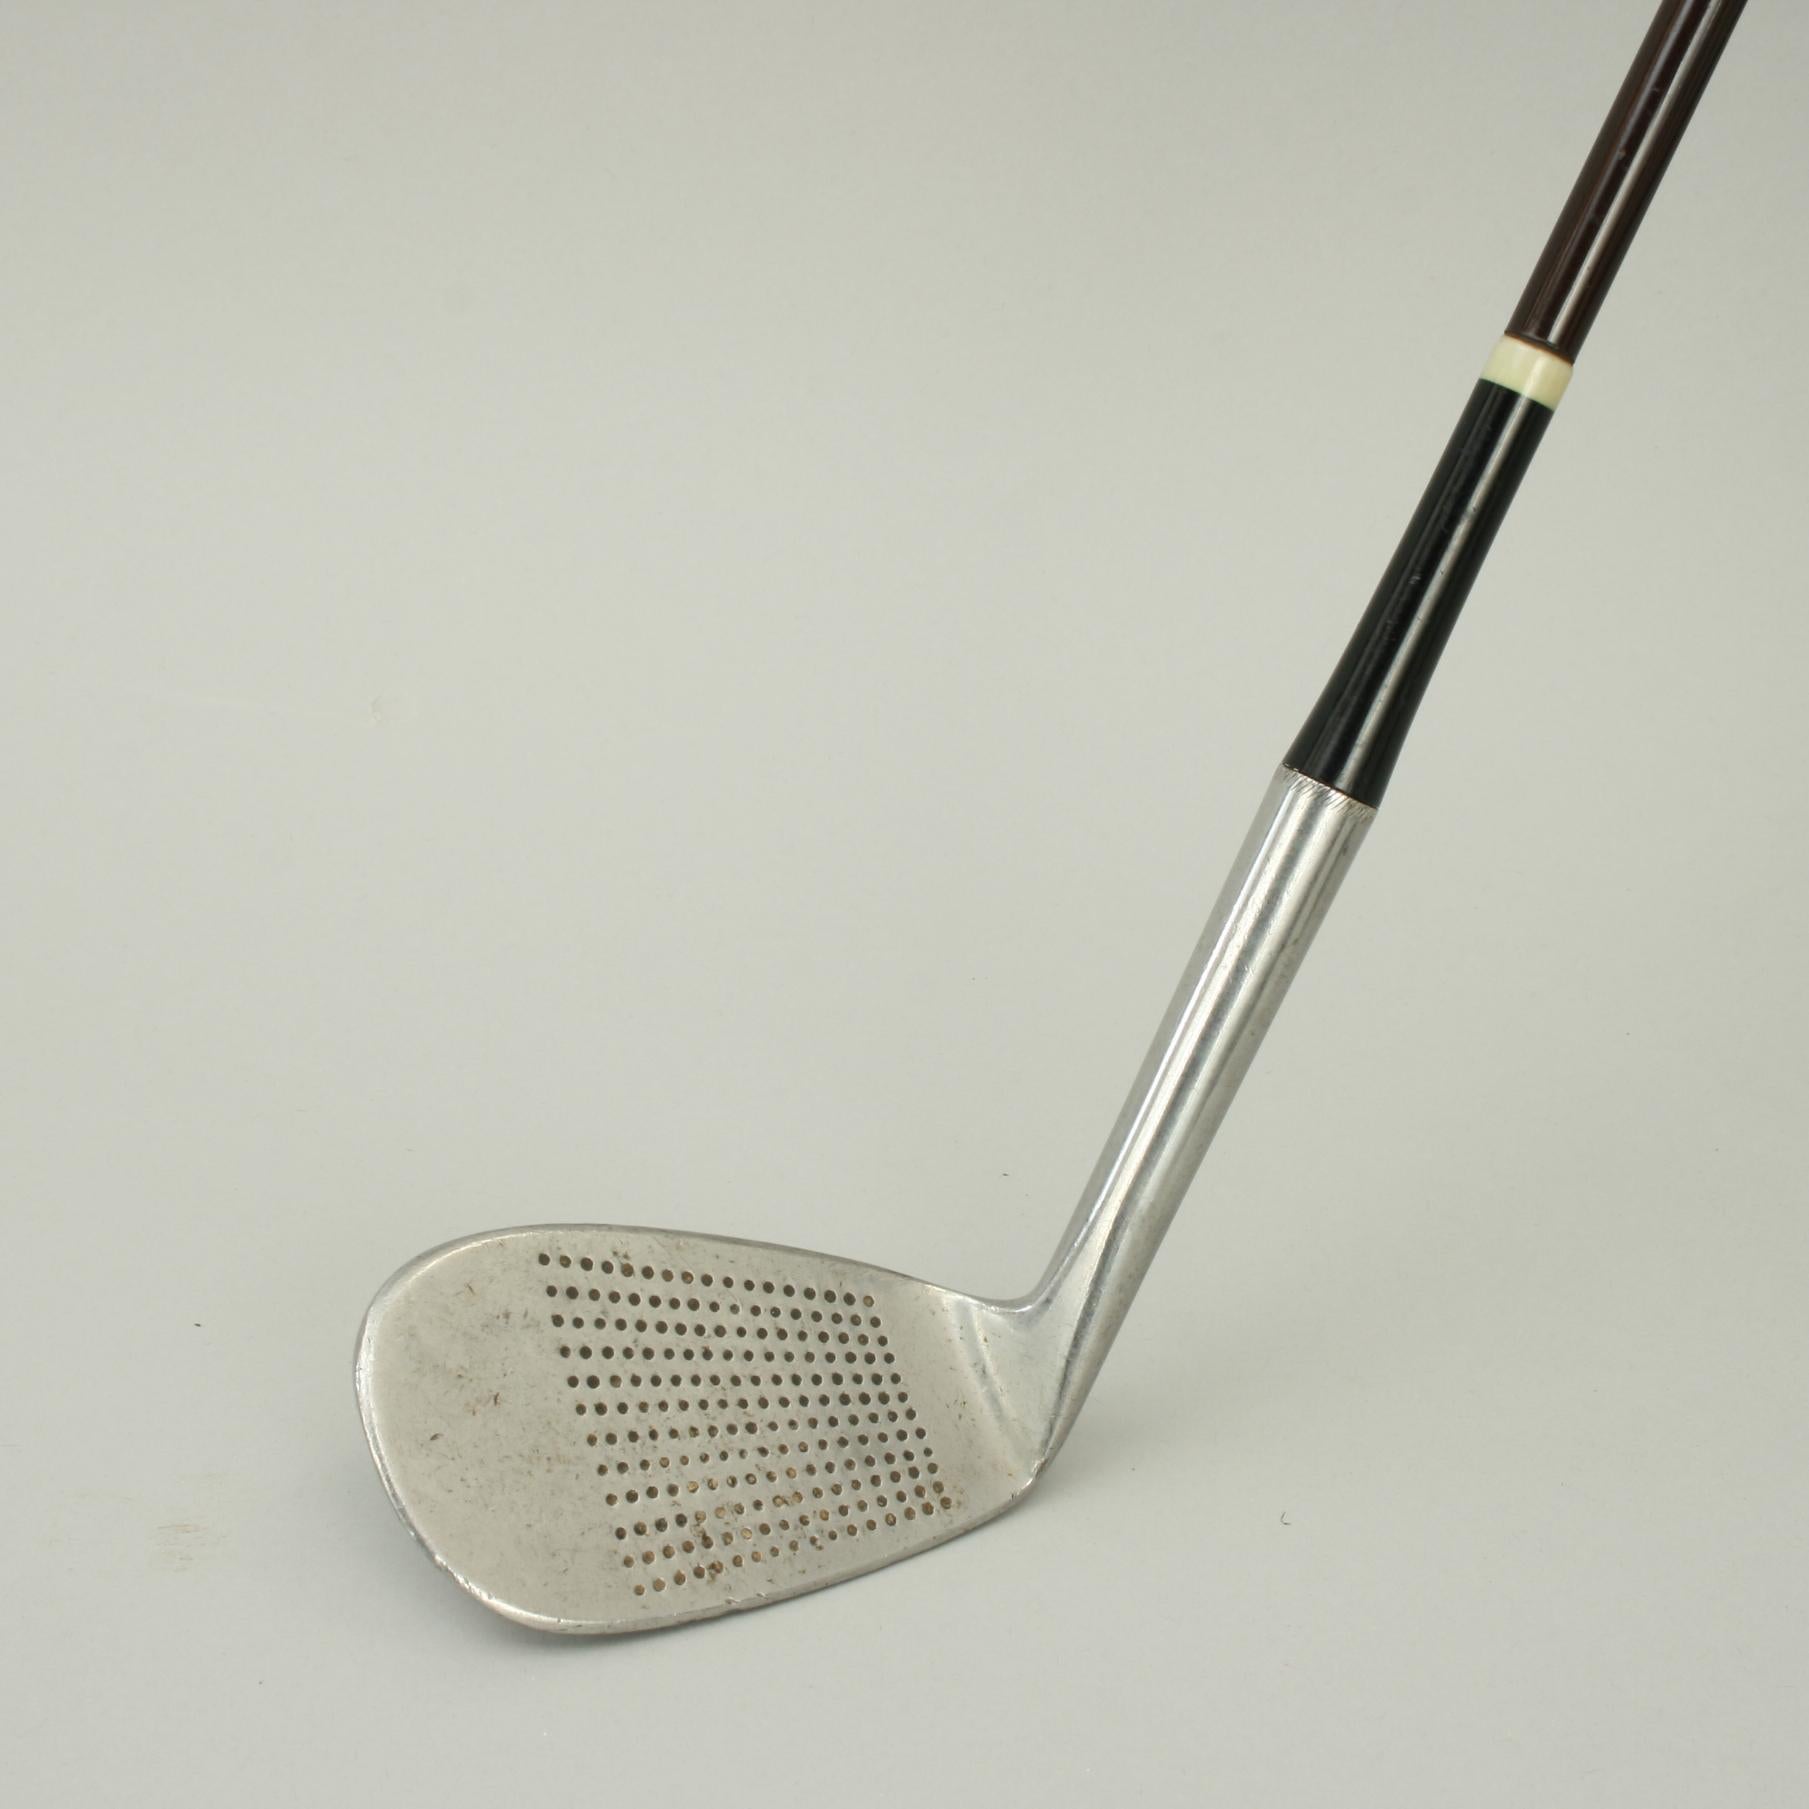 Steel Shafted Tom Morris Golf Club, St Andrews For Sale 1